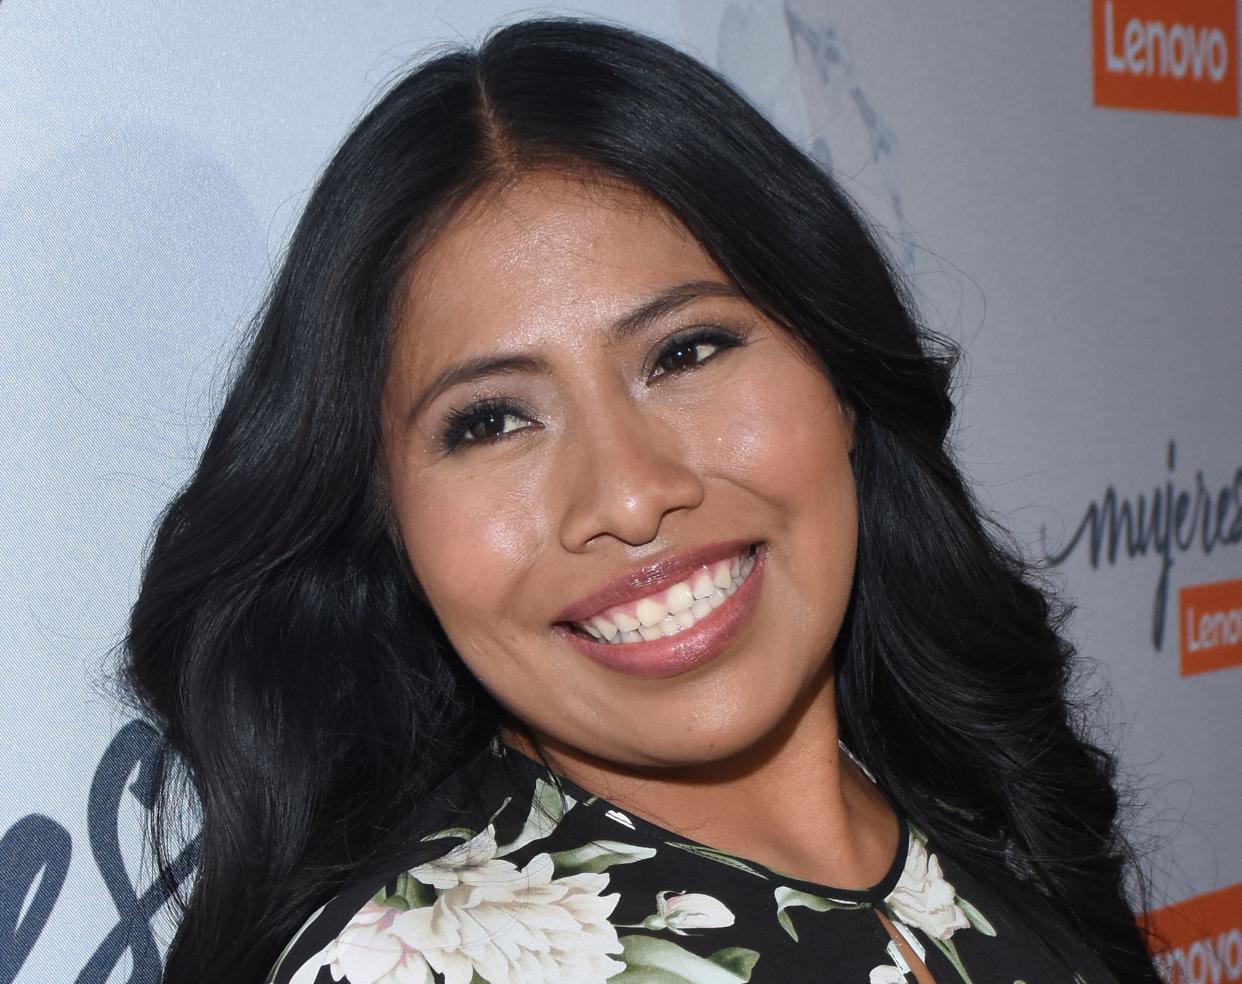 Yalitza Aparicio, the star of "Roma," at an event in Mexico City on Jan. 29.&nbsp; (Photo: Carlos Tischler via Getty Images)